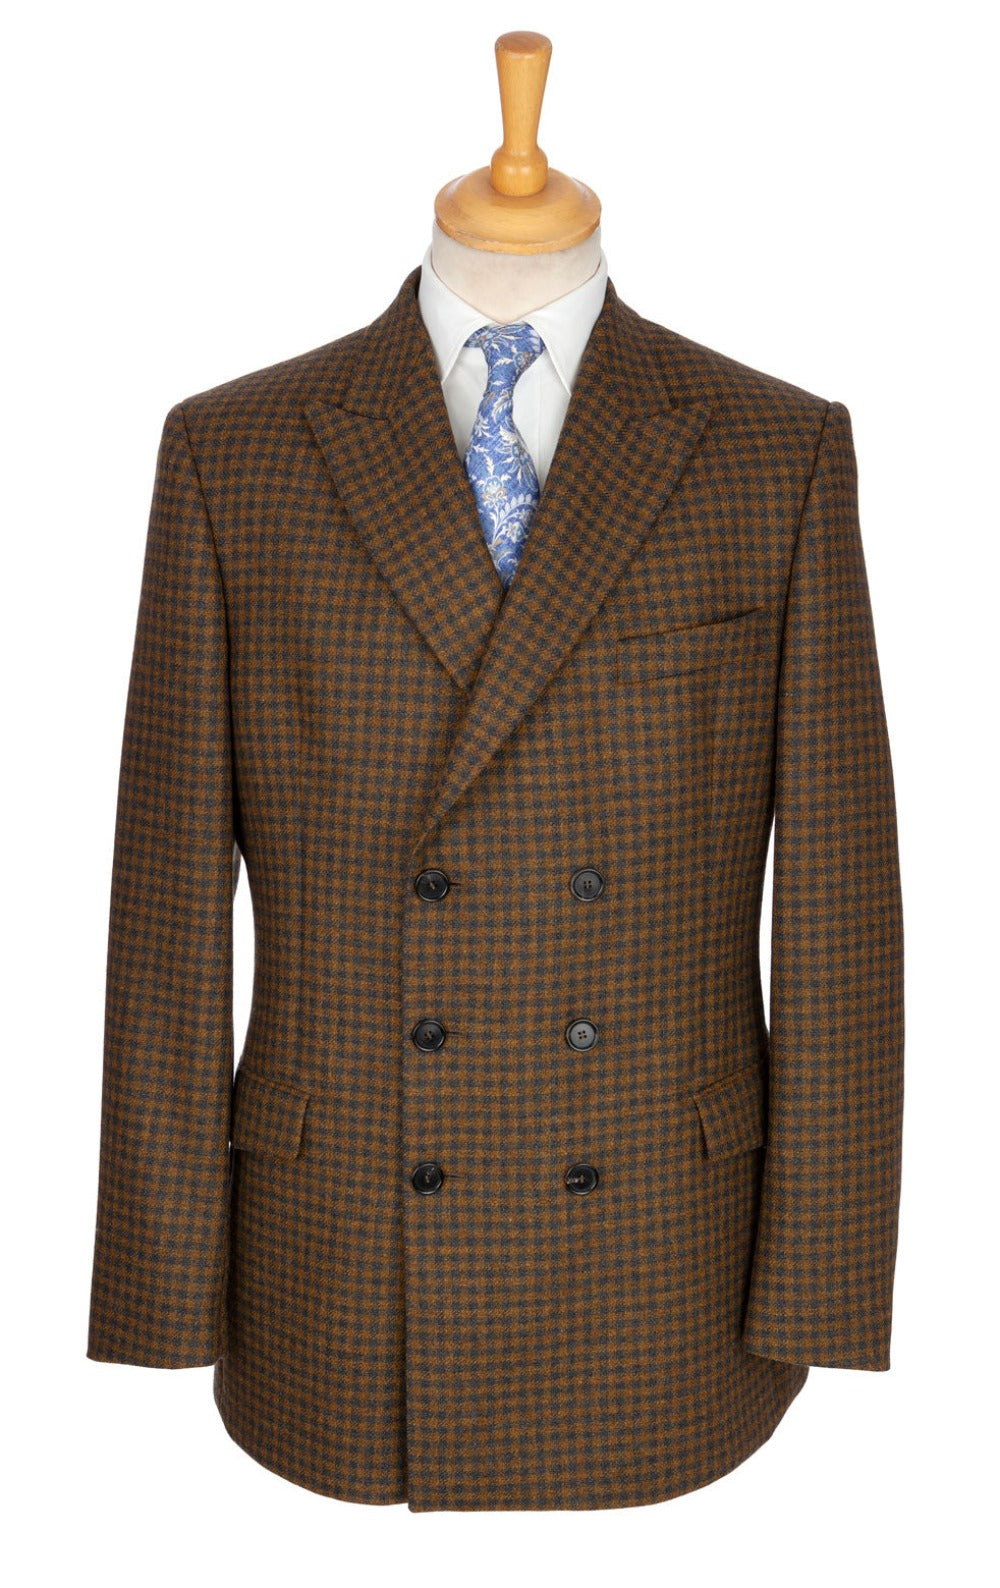 Double-breasted six-button jacket-coat-blazer hybrid made with luxury Scottish wool cloth and designed exclusively by Regent. 